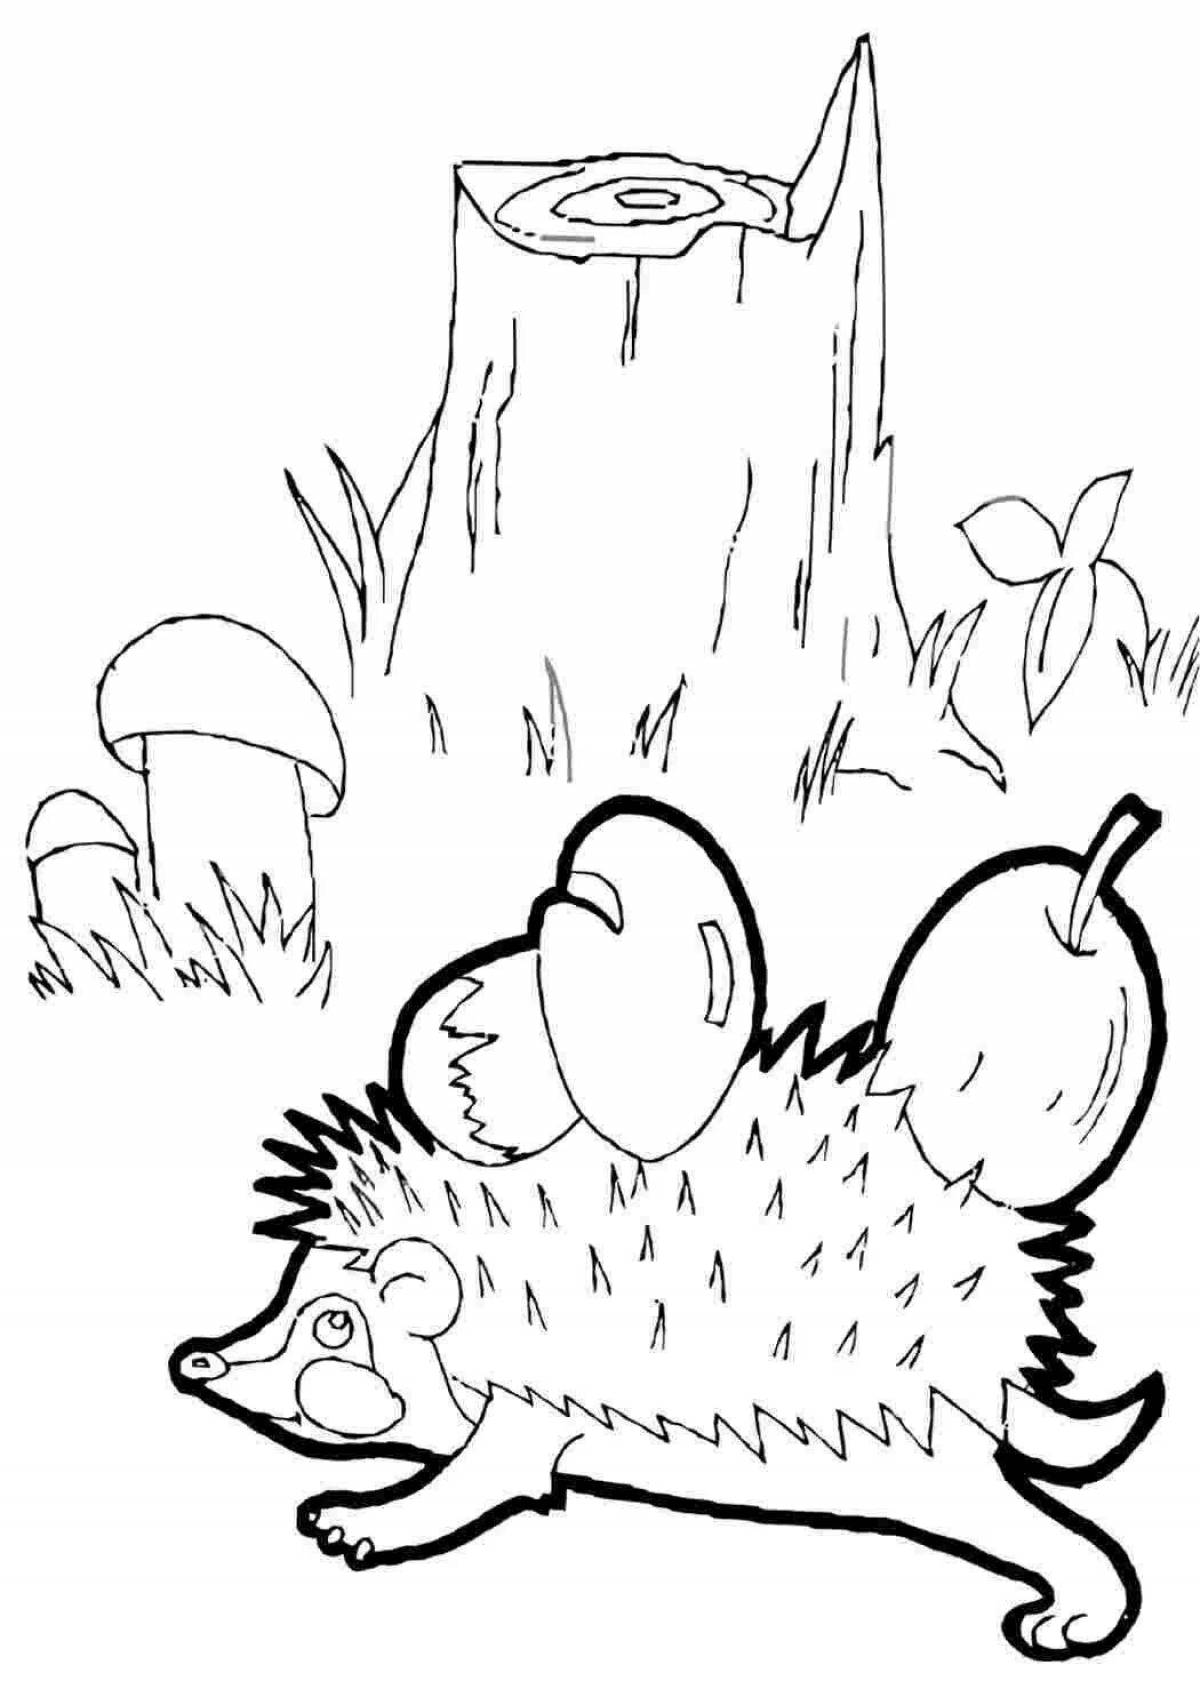 Nimble hedgehog in the forest